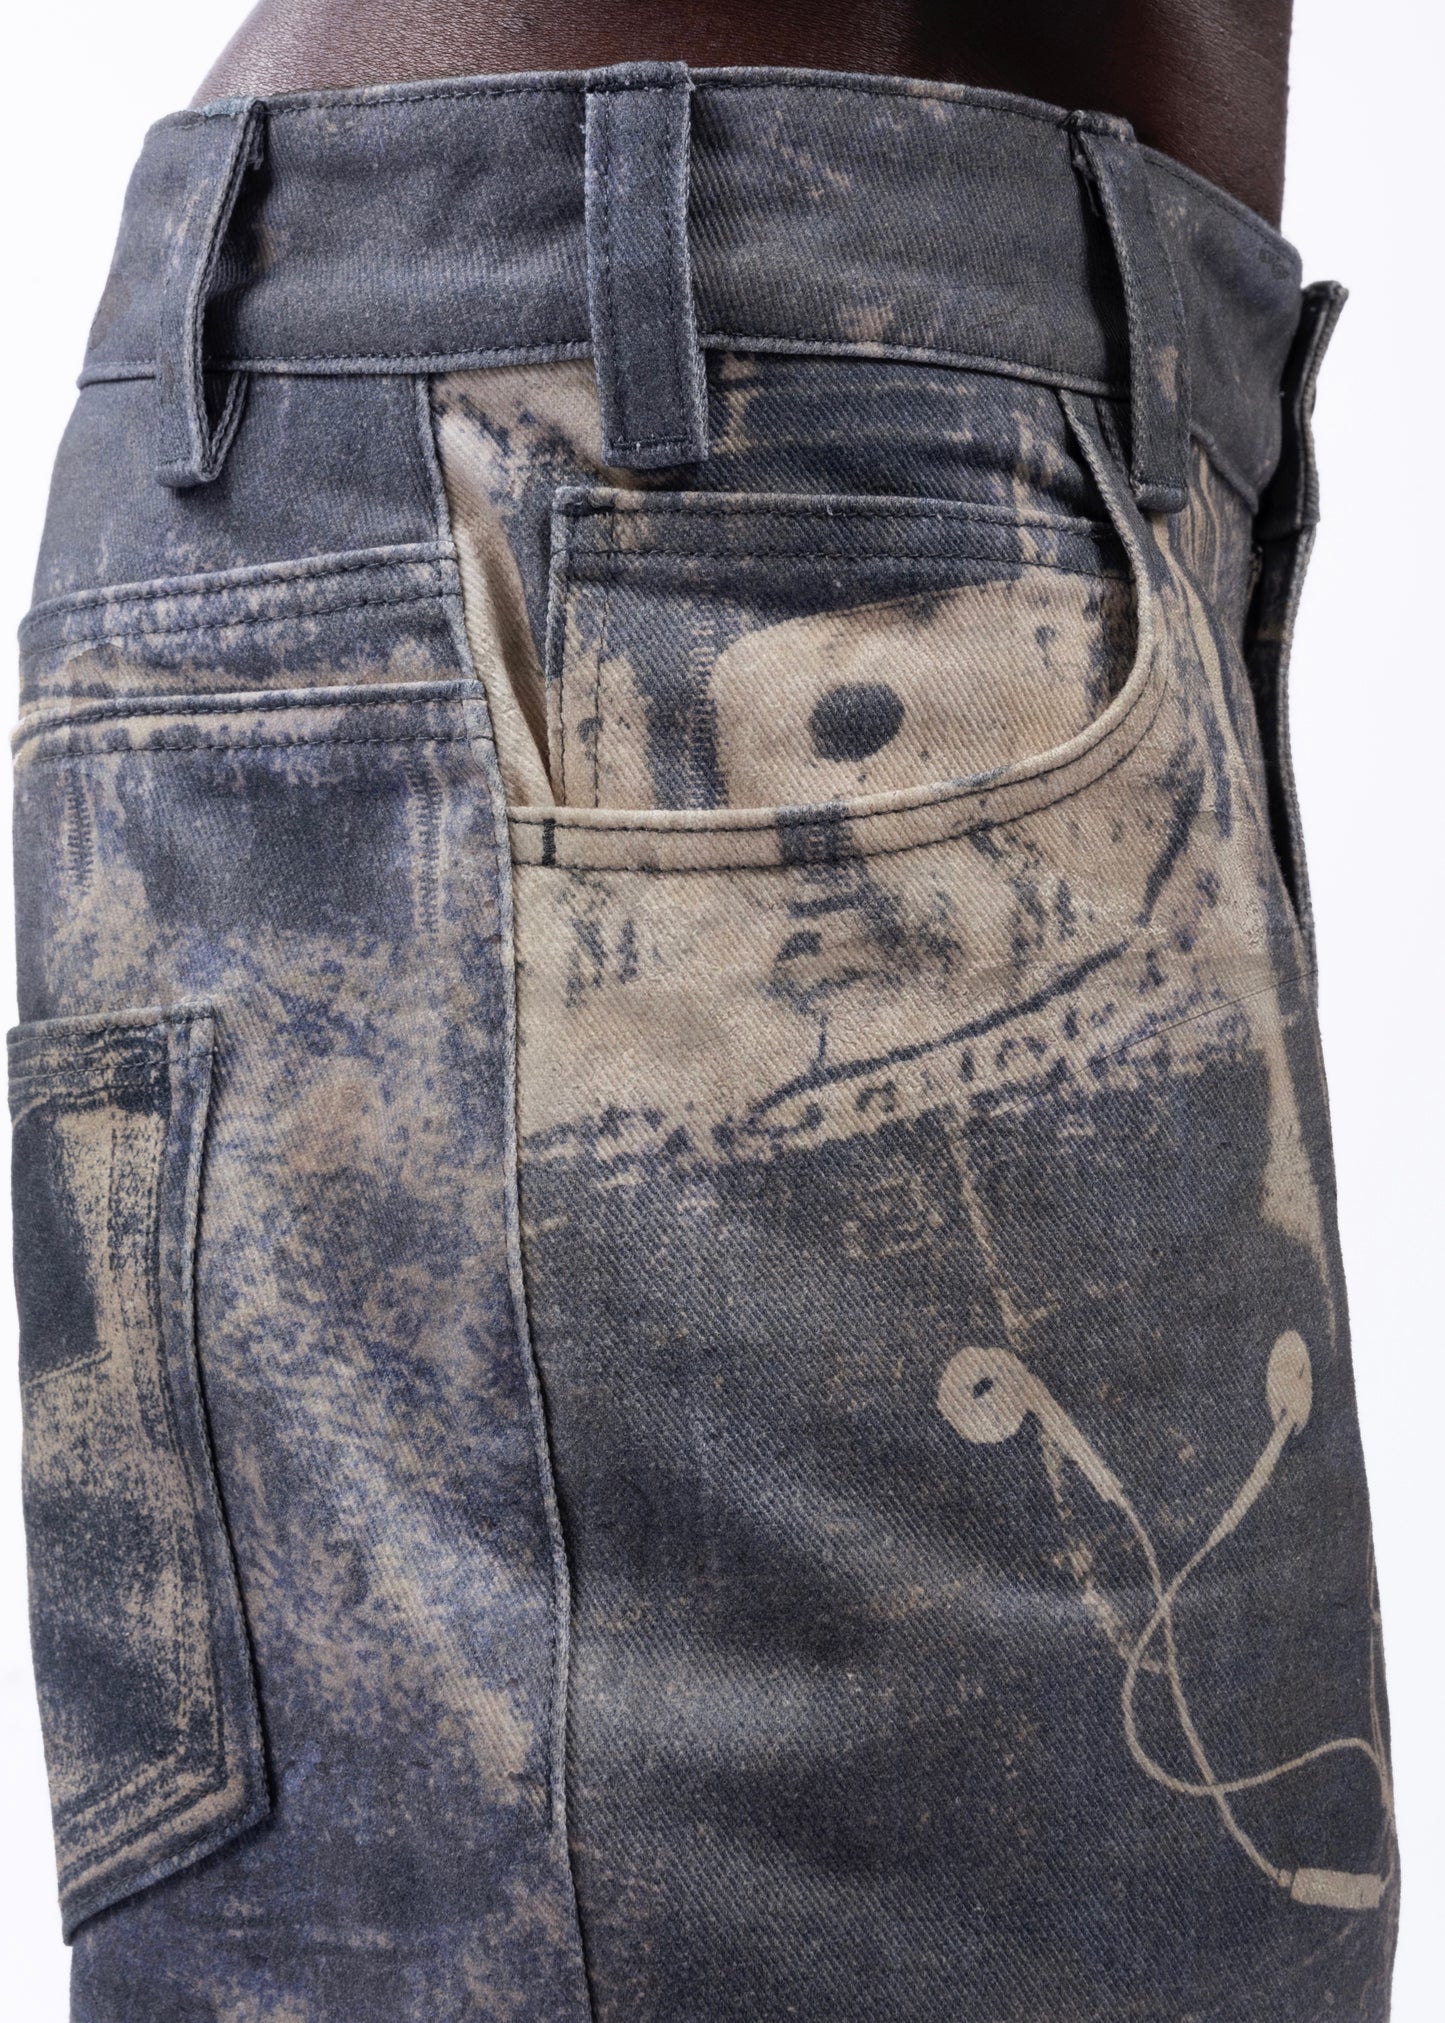 WHAT’S IN MY POCKET DENIM USED BLUE